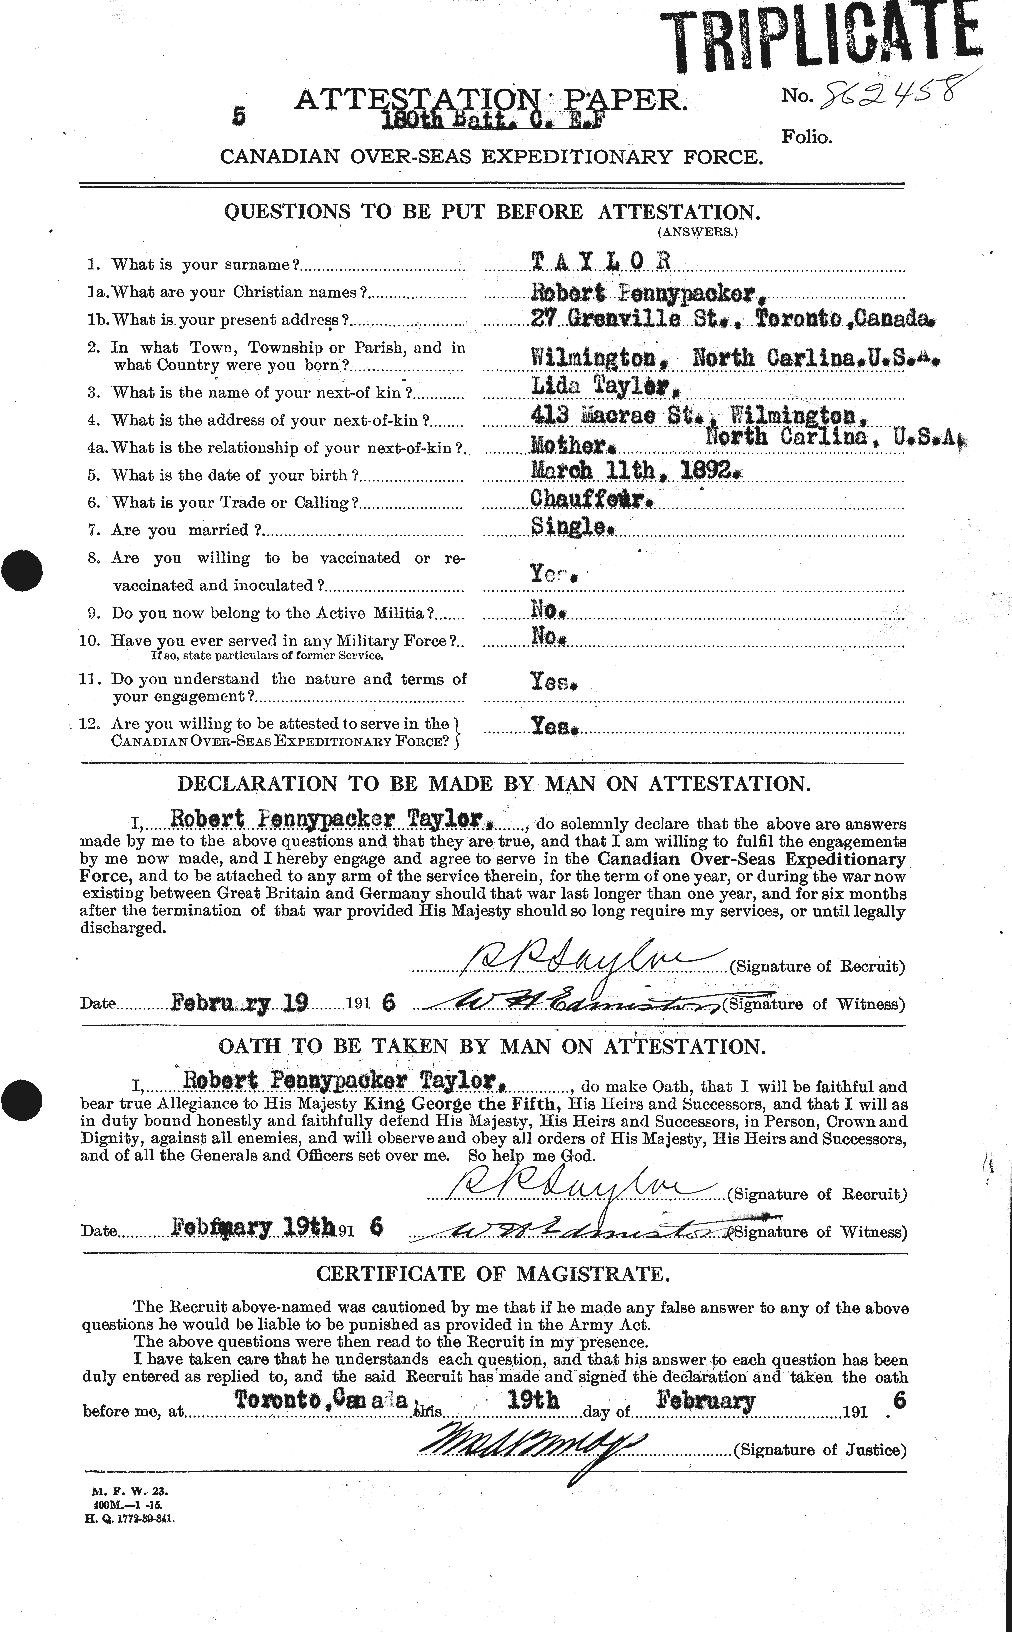 Personnel Records of the First World War - CEF 627495a